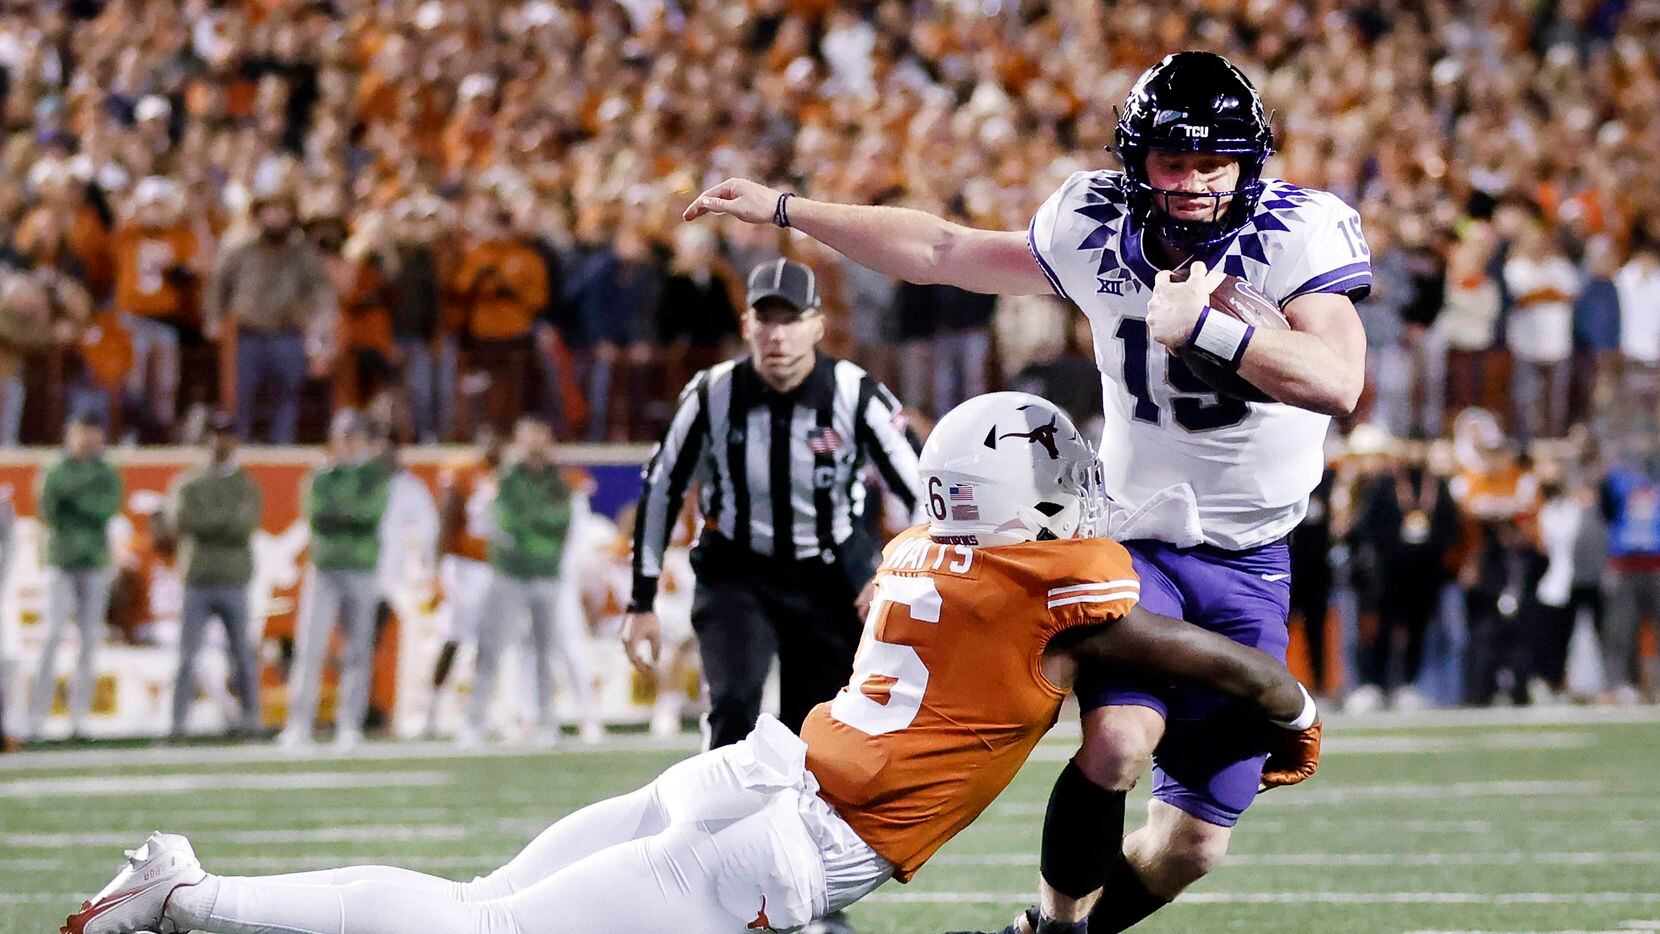 TCU Horned Frogs quarterback Max Duggan (15) is tackled in the open field by Texas Longhorns...